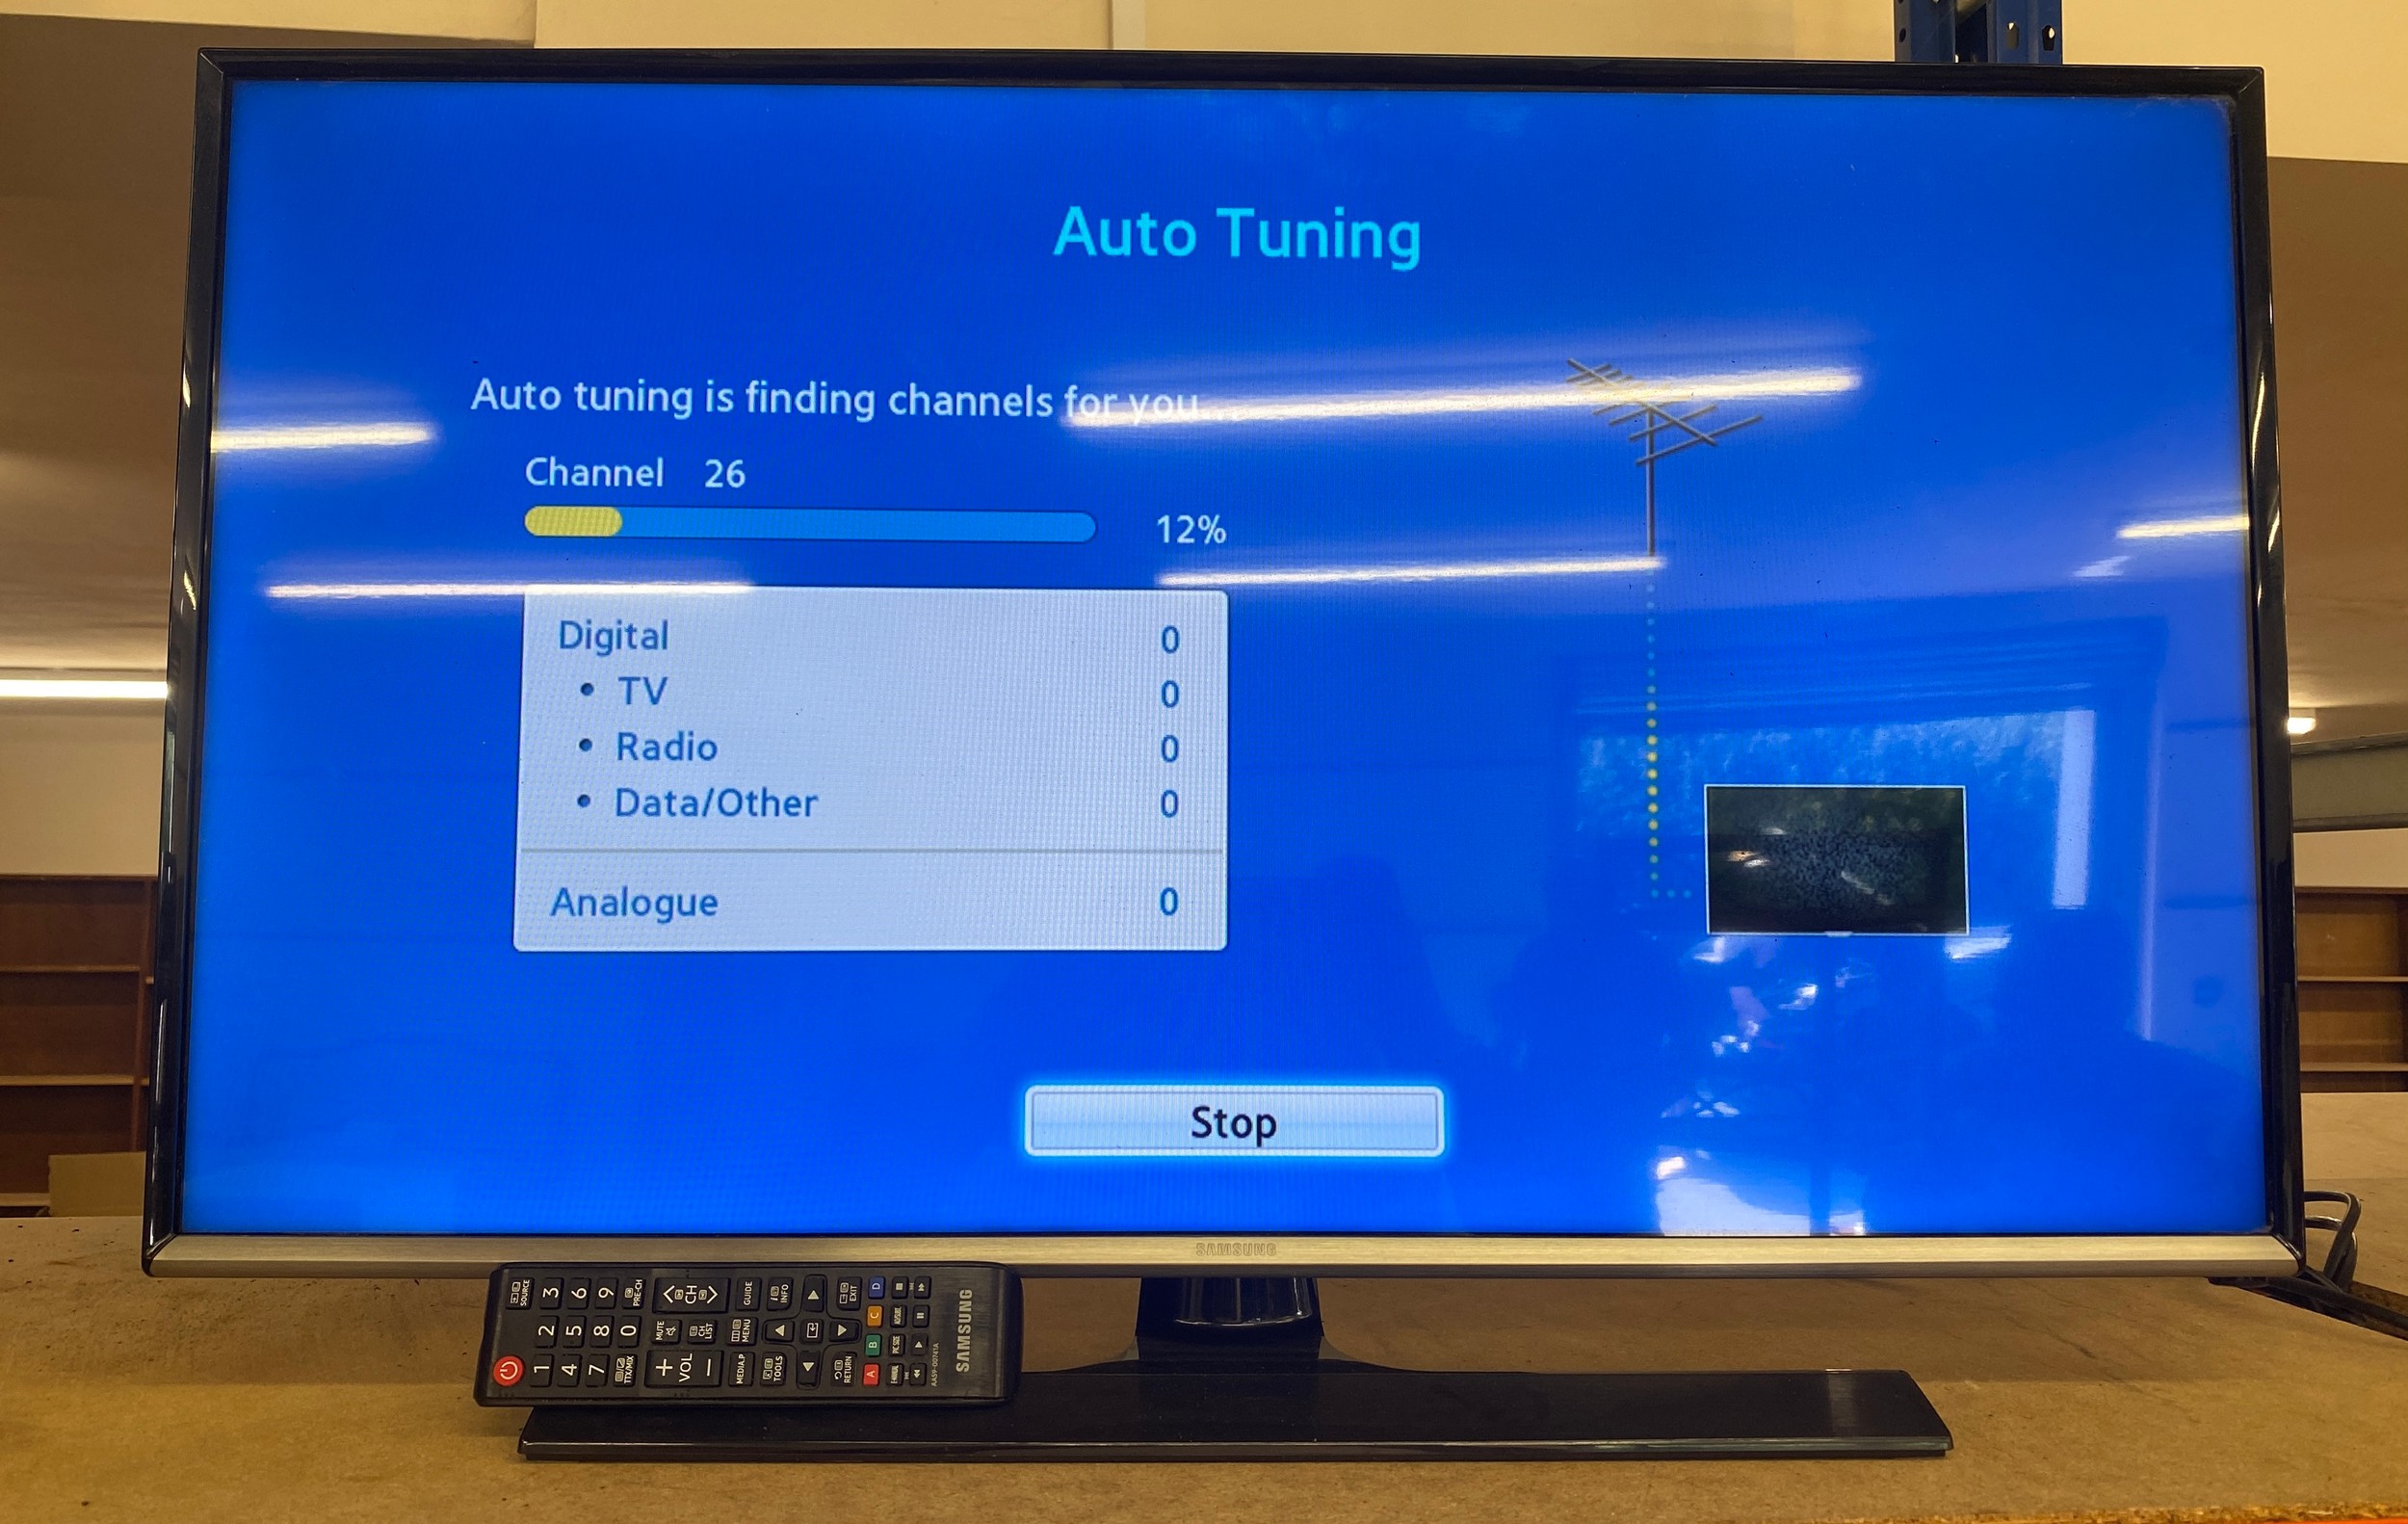 What is “Auto Tuning” in Samsung TV's?